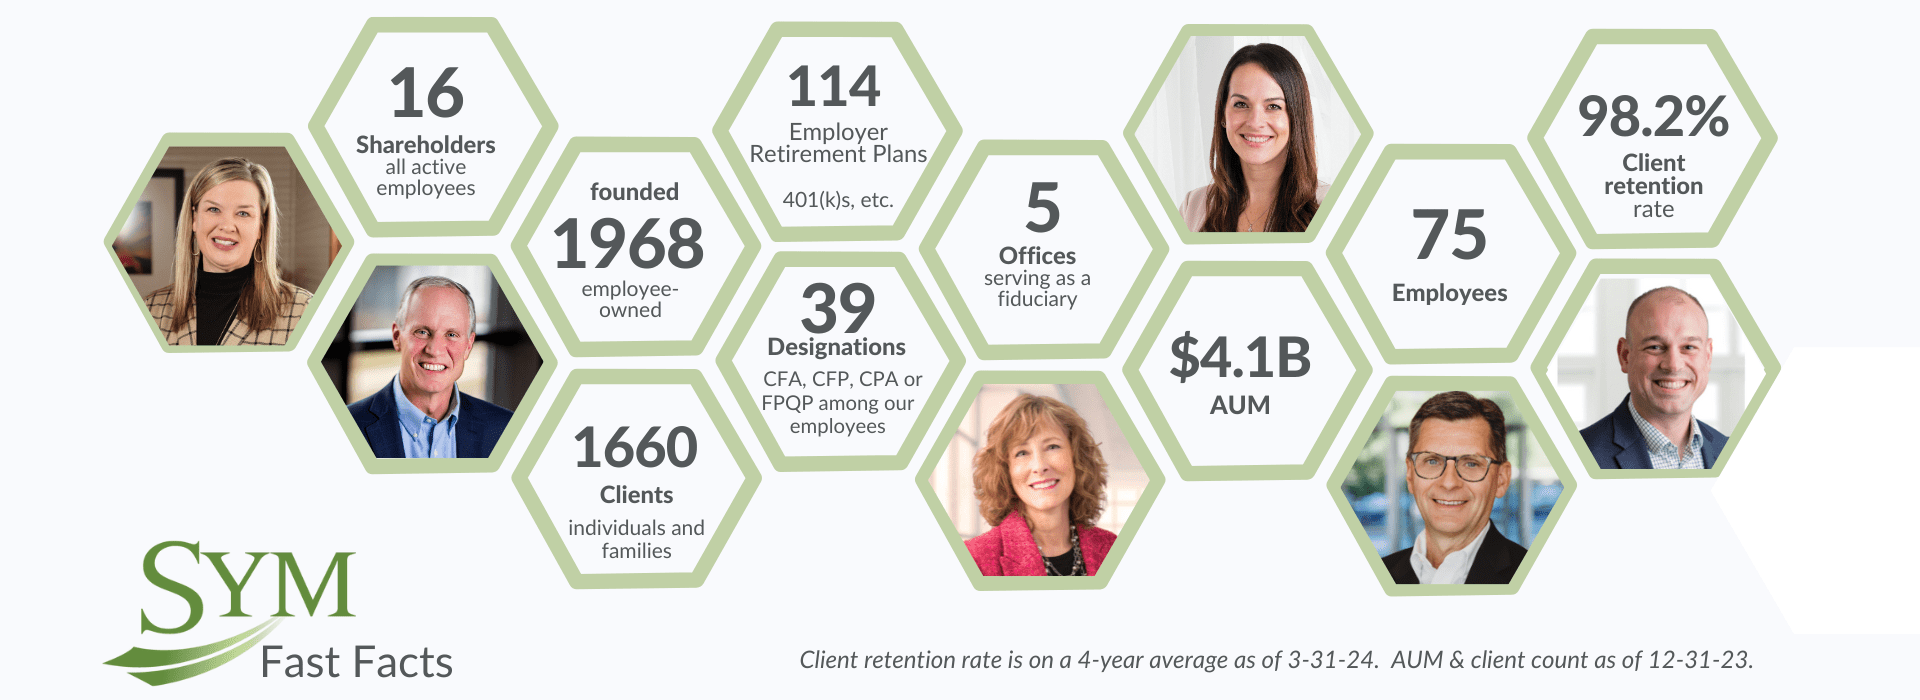 Infographic for SYM displaying company facts: Founded in 1968, 16 employee shareholders, 1968 employee-owned, 1660 clients, 114 retirement plans managed, 5 offices, 39 designations, $4.1B AUM, 75 employees, 98.2% client retention rate. Includes images of team members.